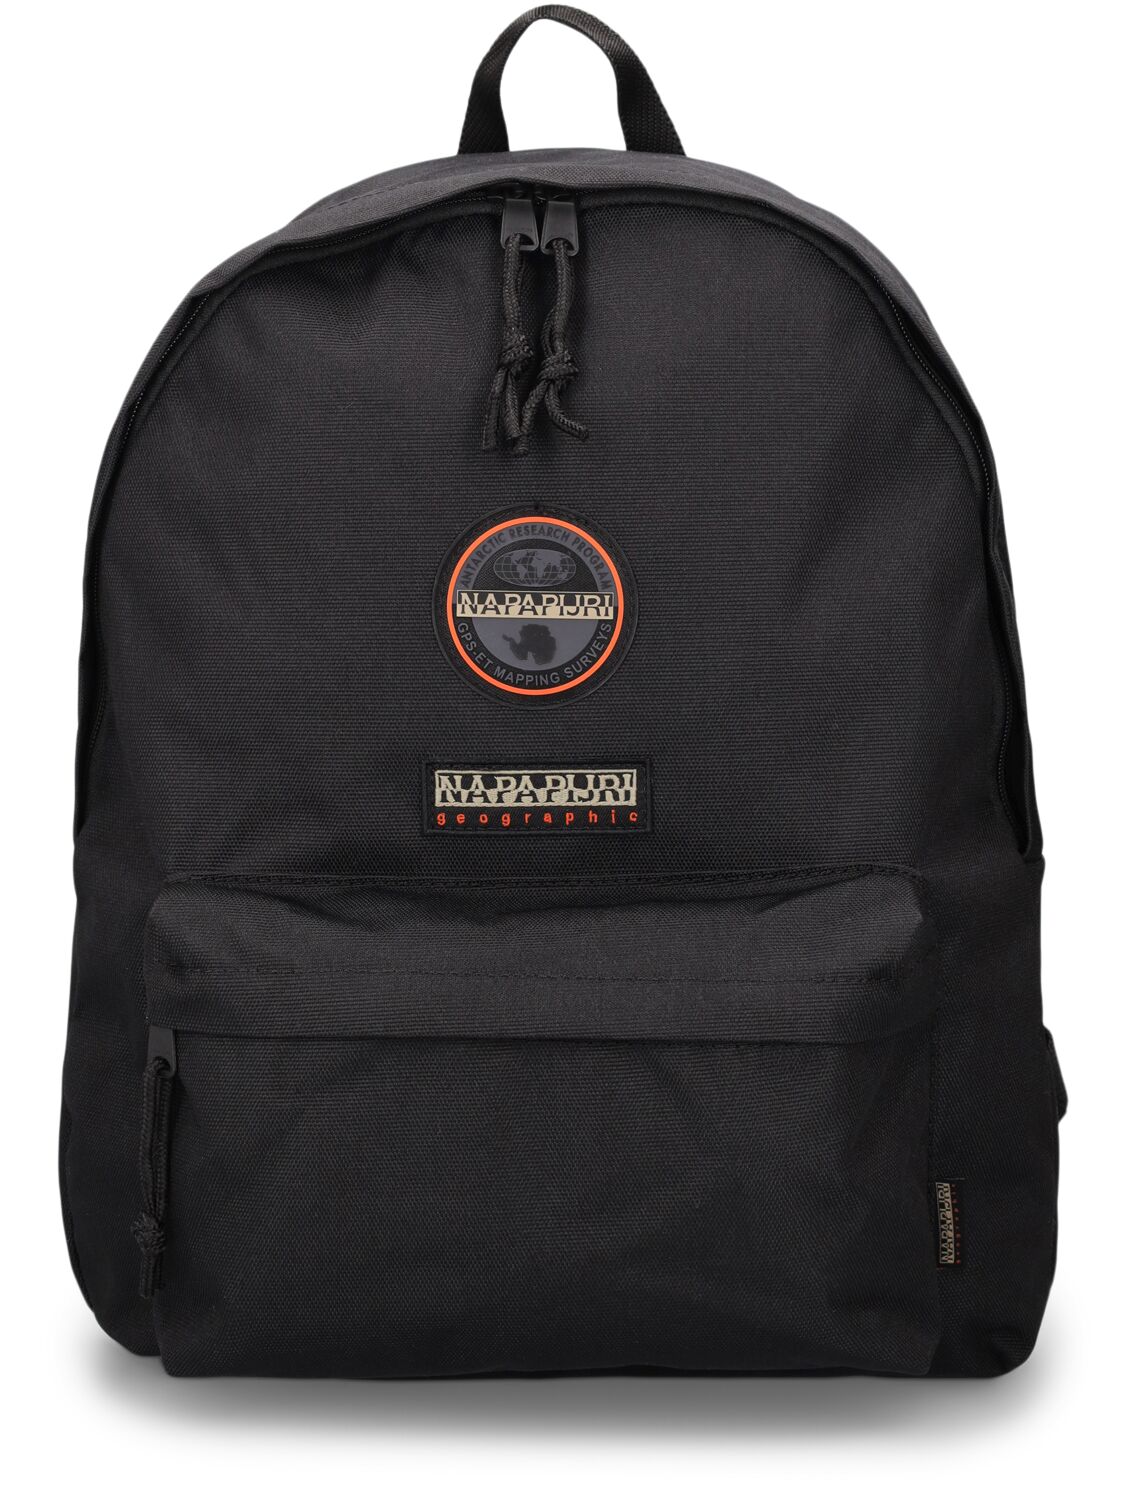 Image of Voyage 3 Tech Backpack